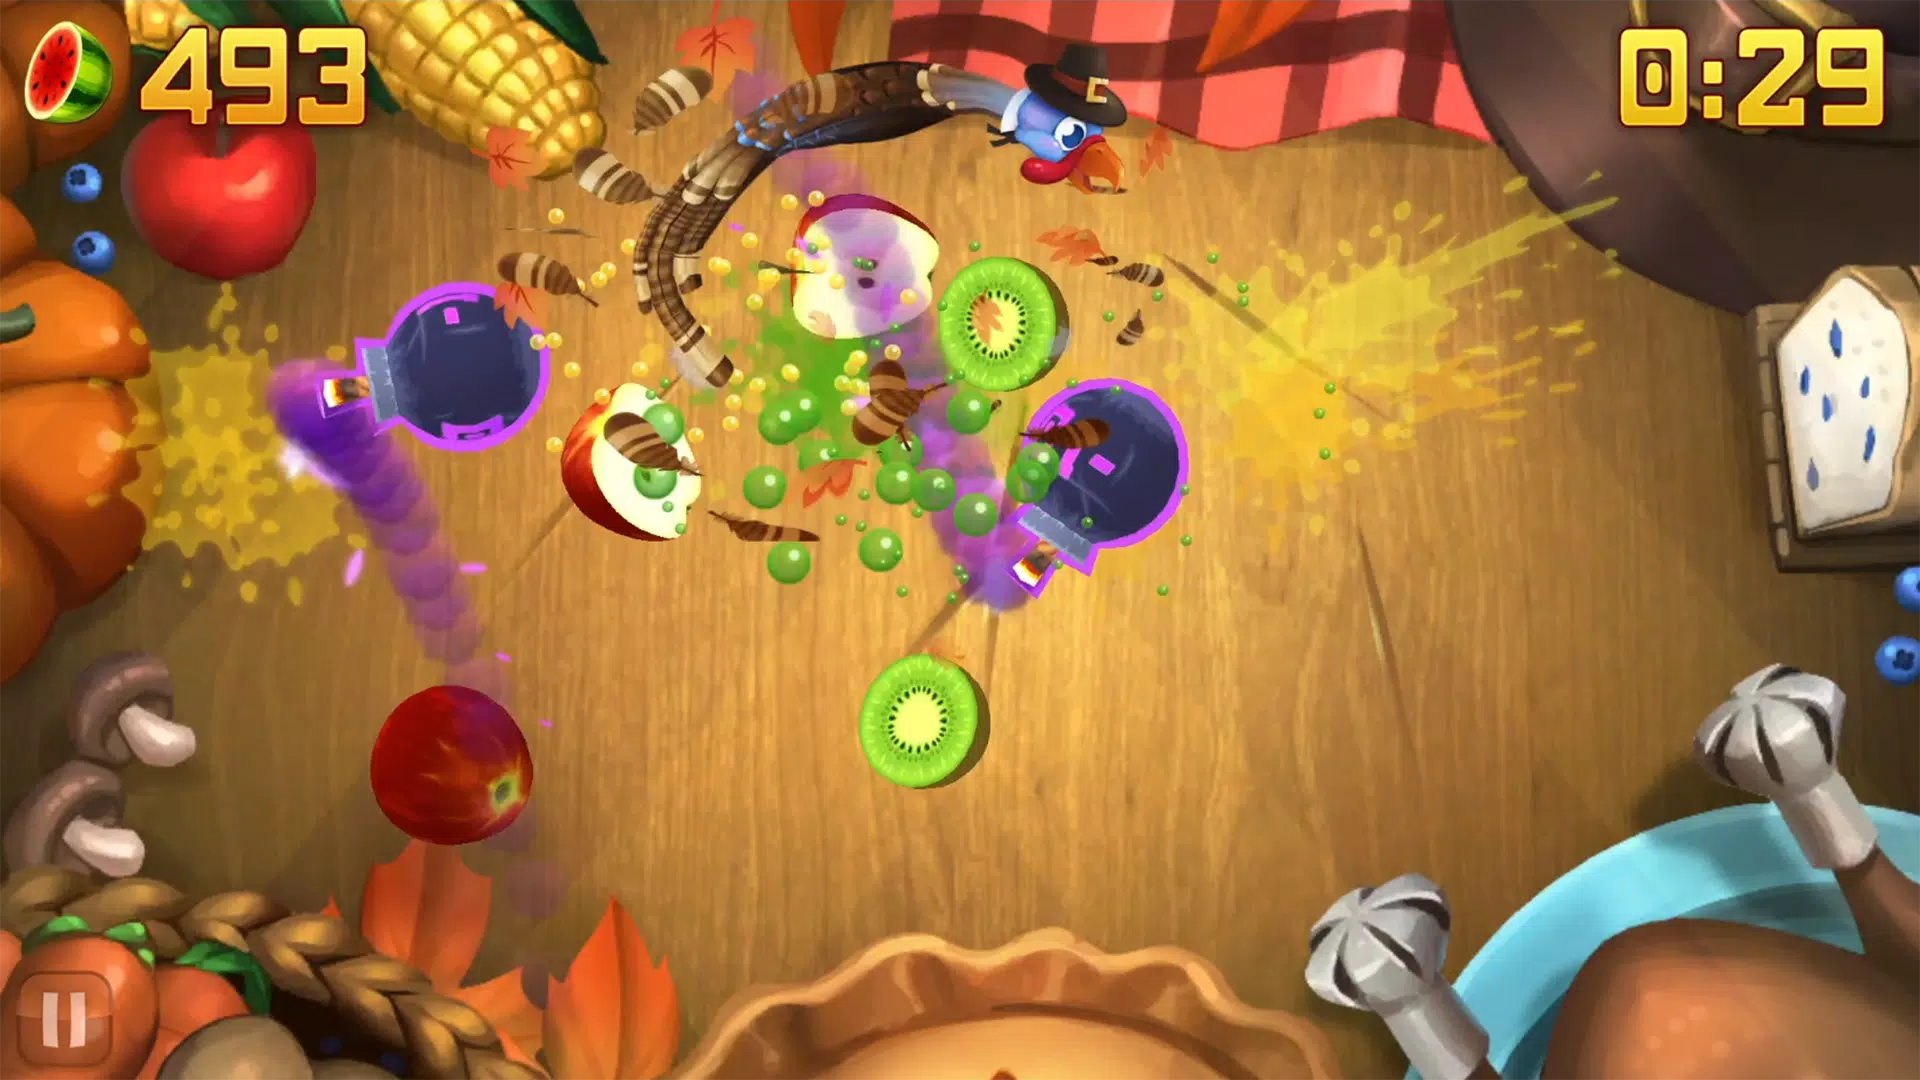 Download Fruit Ninja Apk 3.1.0 For Android (Latest Version)